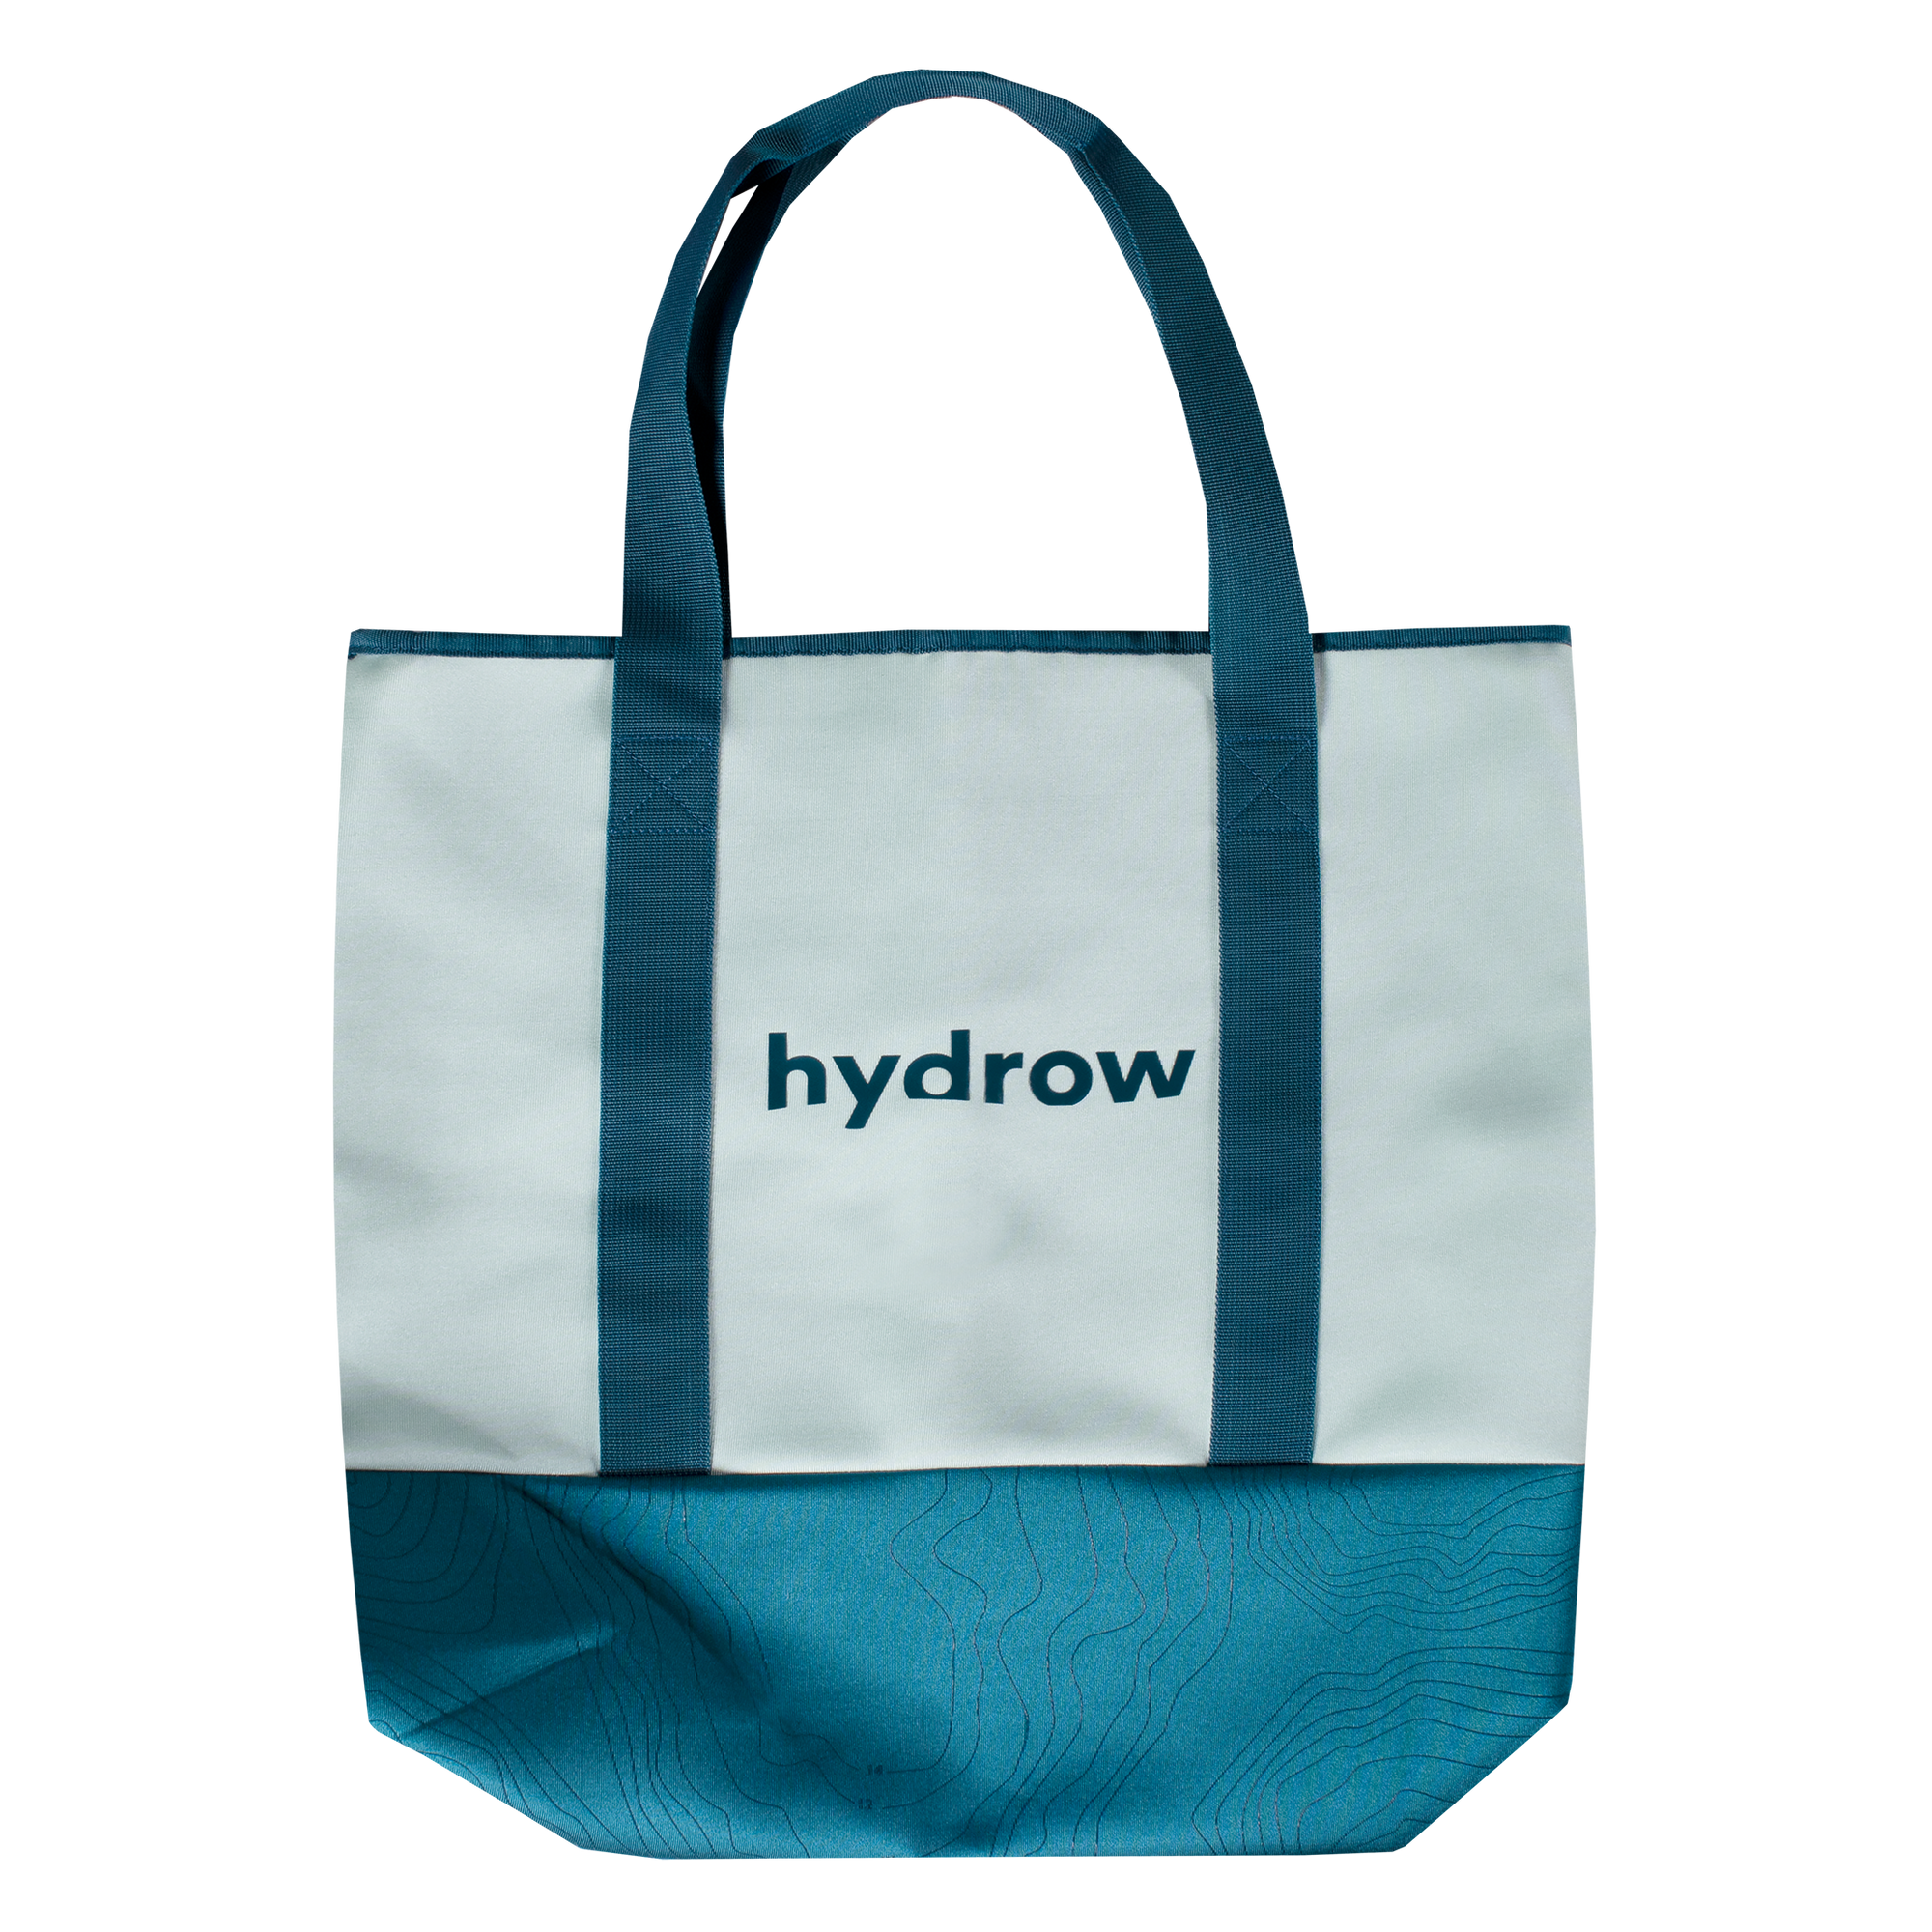 Front view of white and blue hydrow tote bag